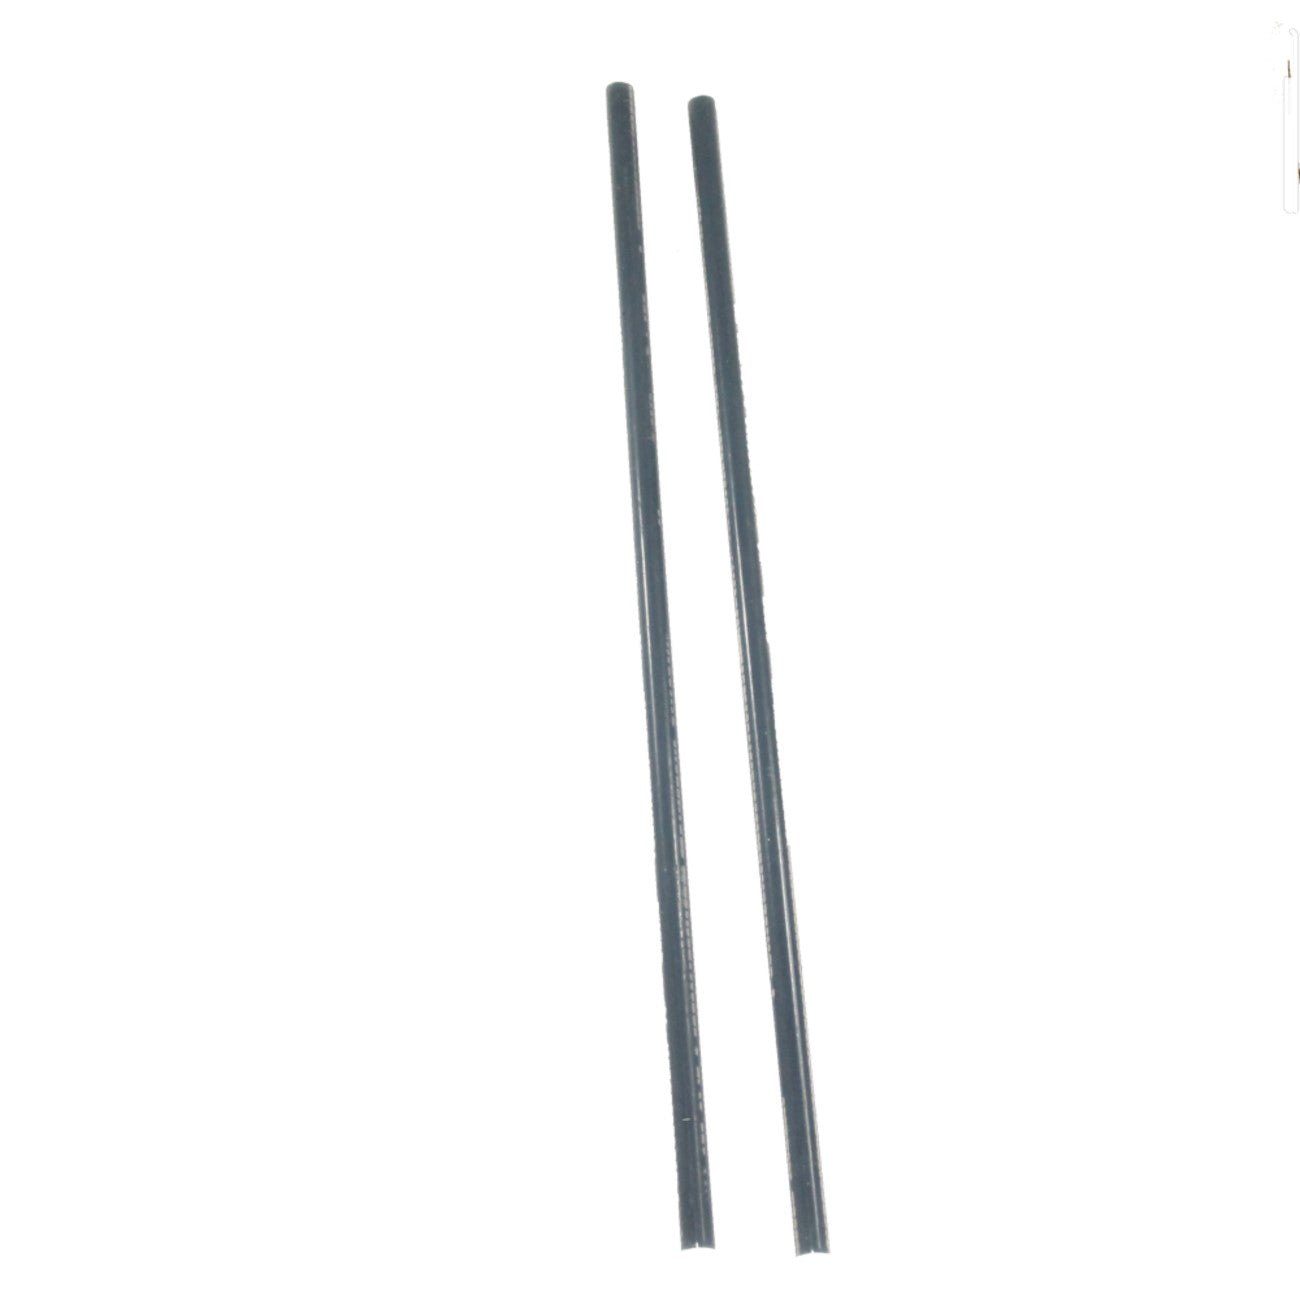 Z-Stix Extra Long 21" Replacement Hand Sticks for Flower/Devil Stick - Sold in Pairs